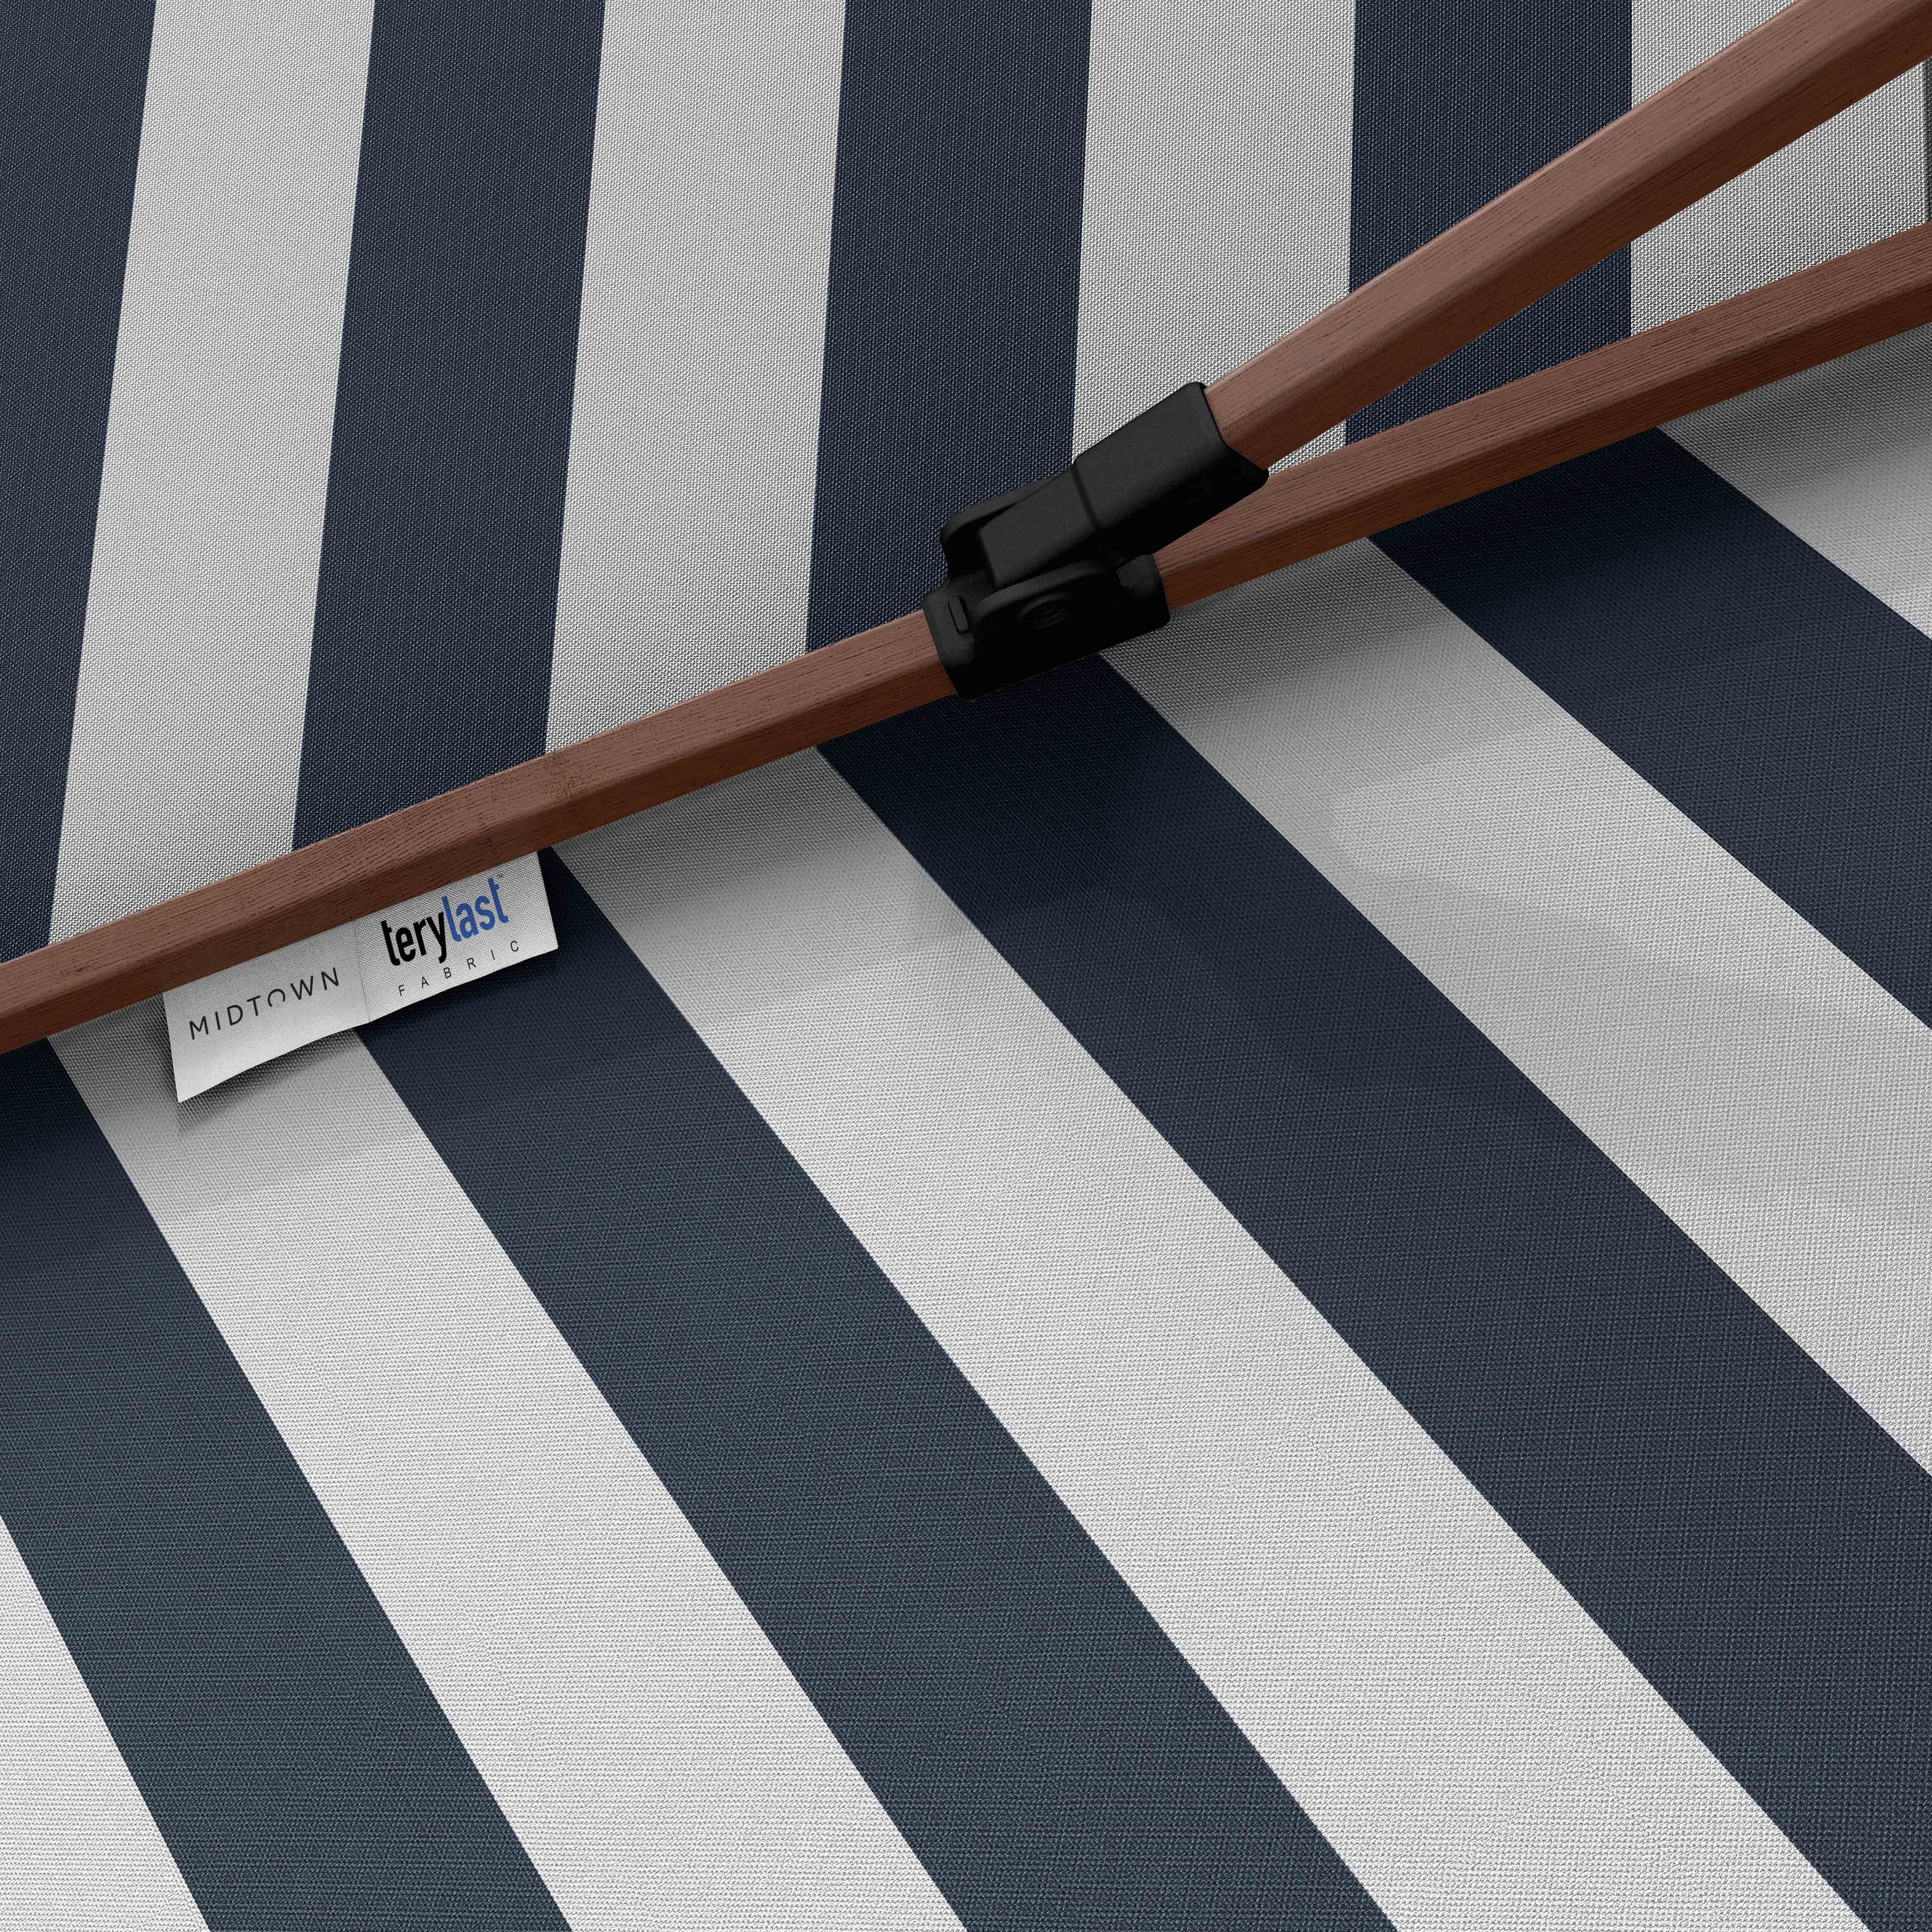 The Wooden™ - Terylast Navy Stripes